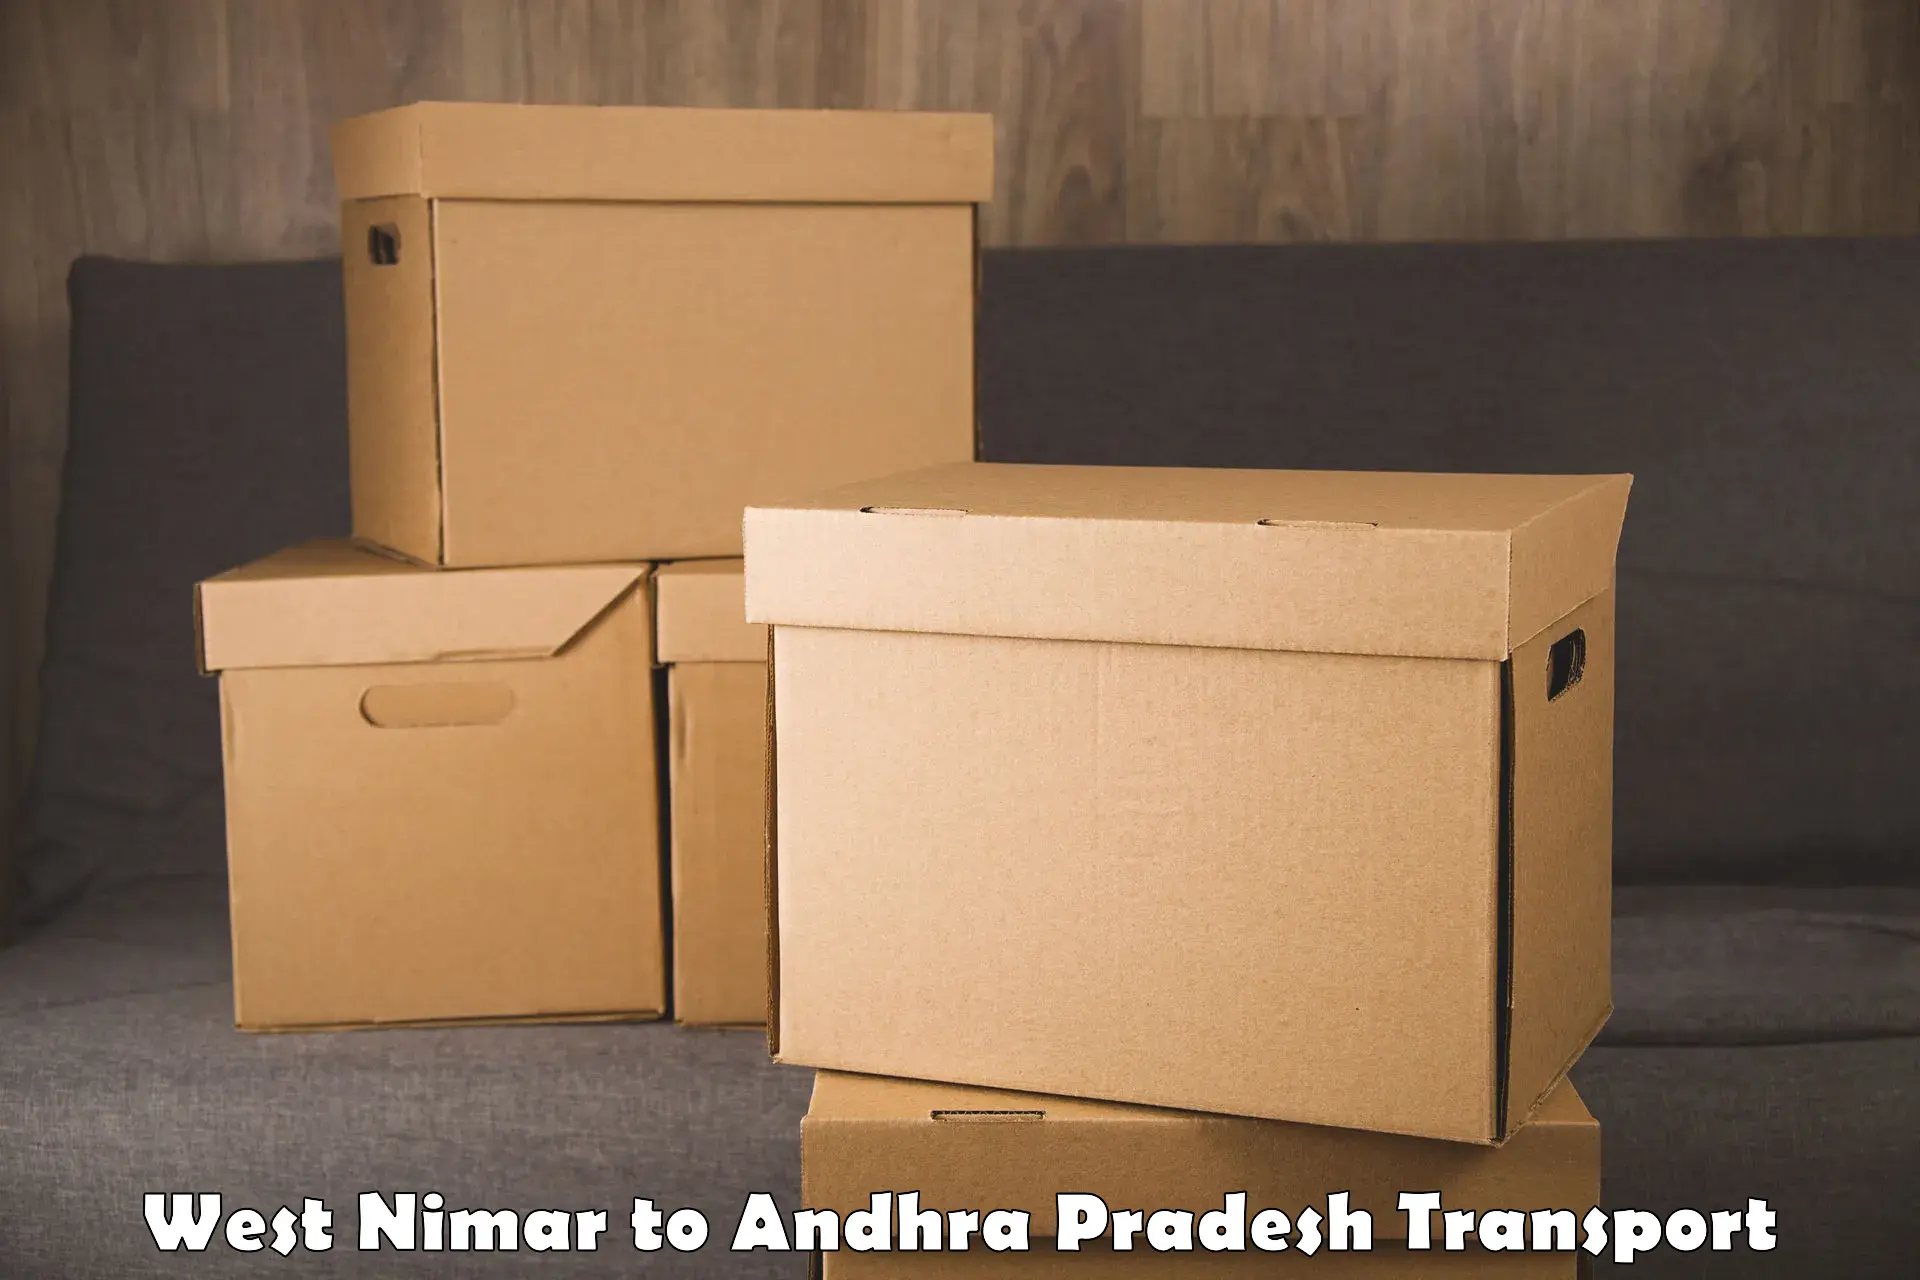 Commercial transport service West Nimar to Challapalli